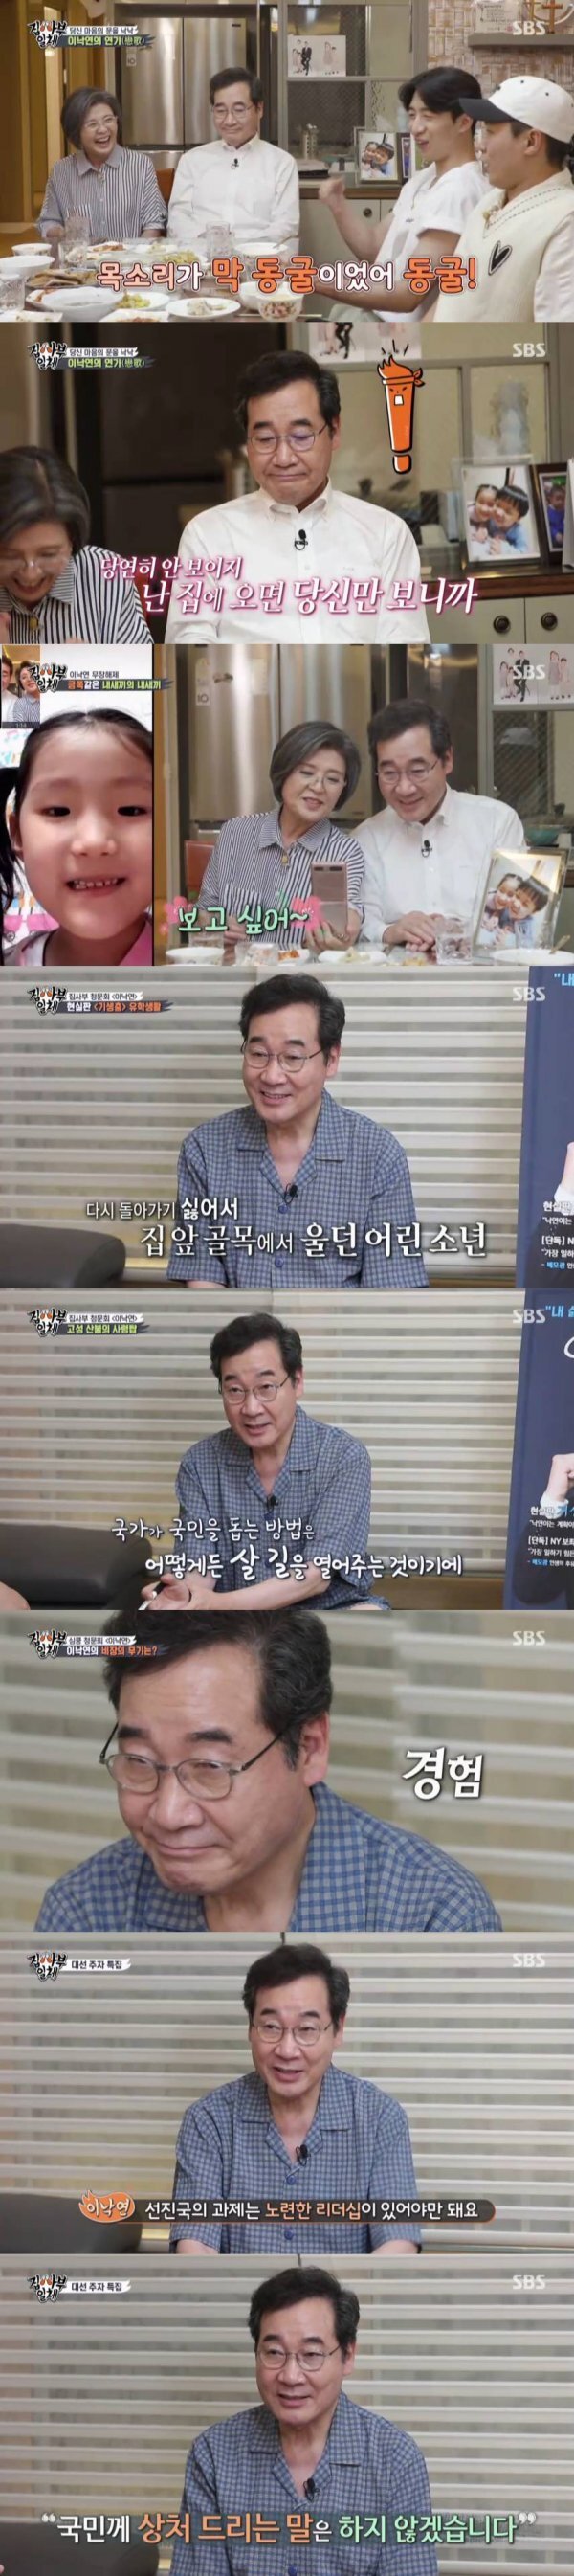 The special feature of the presidential candidate, who provided an opportunity to listen to the life of the presidential candidates of SBS All The Butlers, political philosophy and conviction, drew a hot acclaim.According to Nielsen Korea, a TV viewer rating company, SBS All The Butlers TV viewer ratings in the metropolitan area, which was broadcast on the 3rd, were 6.6%, and 2049 target TV viewer ratings, which are topical and competitive indicators, were 1.7%, and the highest TV viewer ratings per minute rose to 7.9%.Earlier, former prosecutor-general Yoon Seok-ryul and Gyeonggi-do Governor Lee Jae-myung appeared as masters in the special feature of All The Butlers presidential election, and Lee Nak-yeon, former Democratic Party leader, appeared as masters on the show.Lee Nak-yeon welcomed the members with his wife Kim Sook-hee at his home.He revealed his love story with his wife, revealed his desire for humor, or talked with members in pajamas, revealing the reverse aspect that he could not see.Lee Nak-yeon, who asked why he decided to run for the presidential election, said, It was responsibility.When I experienced a lot of things nationally, I thought, Id rather have someone do this. The people also expressed a lot of expectations to me, he said.In the following All The Butlers hearing, Lee Nak-yeon told the story of his study abroad, which was a reality version of the movie parasite.Lee Nak-yeon surprised members when he was 13 years old when he revealed he had started studying abroad at Alone Gwangju without a family.He said, It was very difficult to live alone since junior high school because of the difficult family situation. He was in poor nutrition and was not seen at school at all.I was always lonely, hungry, and without Friend. Lee Nak-yeon expressed his gratitude by recalling the teacher who was a great strength during his school days and Friend who gave half of his salary to study after entering college.He said, My youth is a debt, he said. My body is not my body, but my heart is that it is the many people who fed me.I lived in the grace of so many people.Since then, the members have asked about former prosecutor general Yoon Seok-ryul and Lee Jae-myung, governor of Gyeonggi Province, as a common question for the presidential candidate.Asked about the strengths he wanted to bring from the two, Lee Nak-yeon cited the ruggedness of the young seak-ryul and the quickness of Lee Jae-myung.On the contrary, he said, I do not think it is a direct measure, but I have never done government, parliament, central government and local government, internal affairs and diplomacy, and military.He added, I will be much better at humor if I add another thing.Lee Nak-yeon replied confidently, Yes, to the question I am the 20th president of South Korea, and said, It is the closest to the requirements of the leader needed for South Korea now.South Korea has been incorporated into advanced countries this year, and South Koreas task is as advanced as it is, he said. The task of advanced countries must have experienced leadership.Korea depends on trade for 80 percent of India, and we have to do diplomacy for India, but Im the only one who has done it, he said.Finally, Lee Nak-yeon asked, If I become president, I will never do it. I will not say anything that hurts the people.I will not give such a wound, such as making a ridiculous remark or making a ridiculous mess that will doubt my personality. Im disappointed that our countrys face is that much, he added.The special feature of All The Butlers, which featured former prosecutor general Yoon Seok-ryul, Gyeonggi Province Governor Lee Jae-myung and former Democratic Party leader Lee Nak-yeon as masters, focused on keywords related to them through the All The Butlers hearing, and provided opportunities to listen to political philosophy and convictions, including the story of their lives.On the other hand, at the end of the broadcast, Dr. Oh Eun-young, Park Jong-bok, real estate consultant, and Han Moon-cheol lawyer were expected to appear as a special feature of crisis escape.